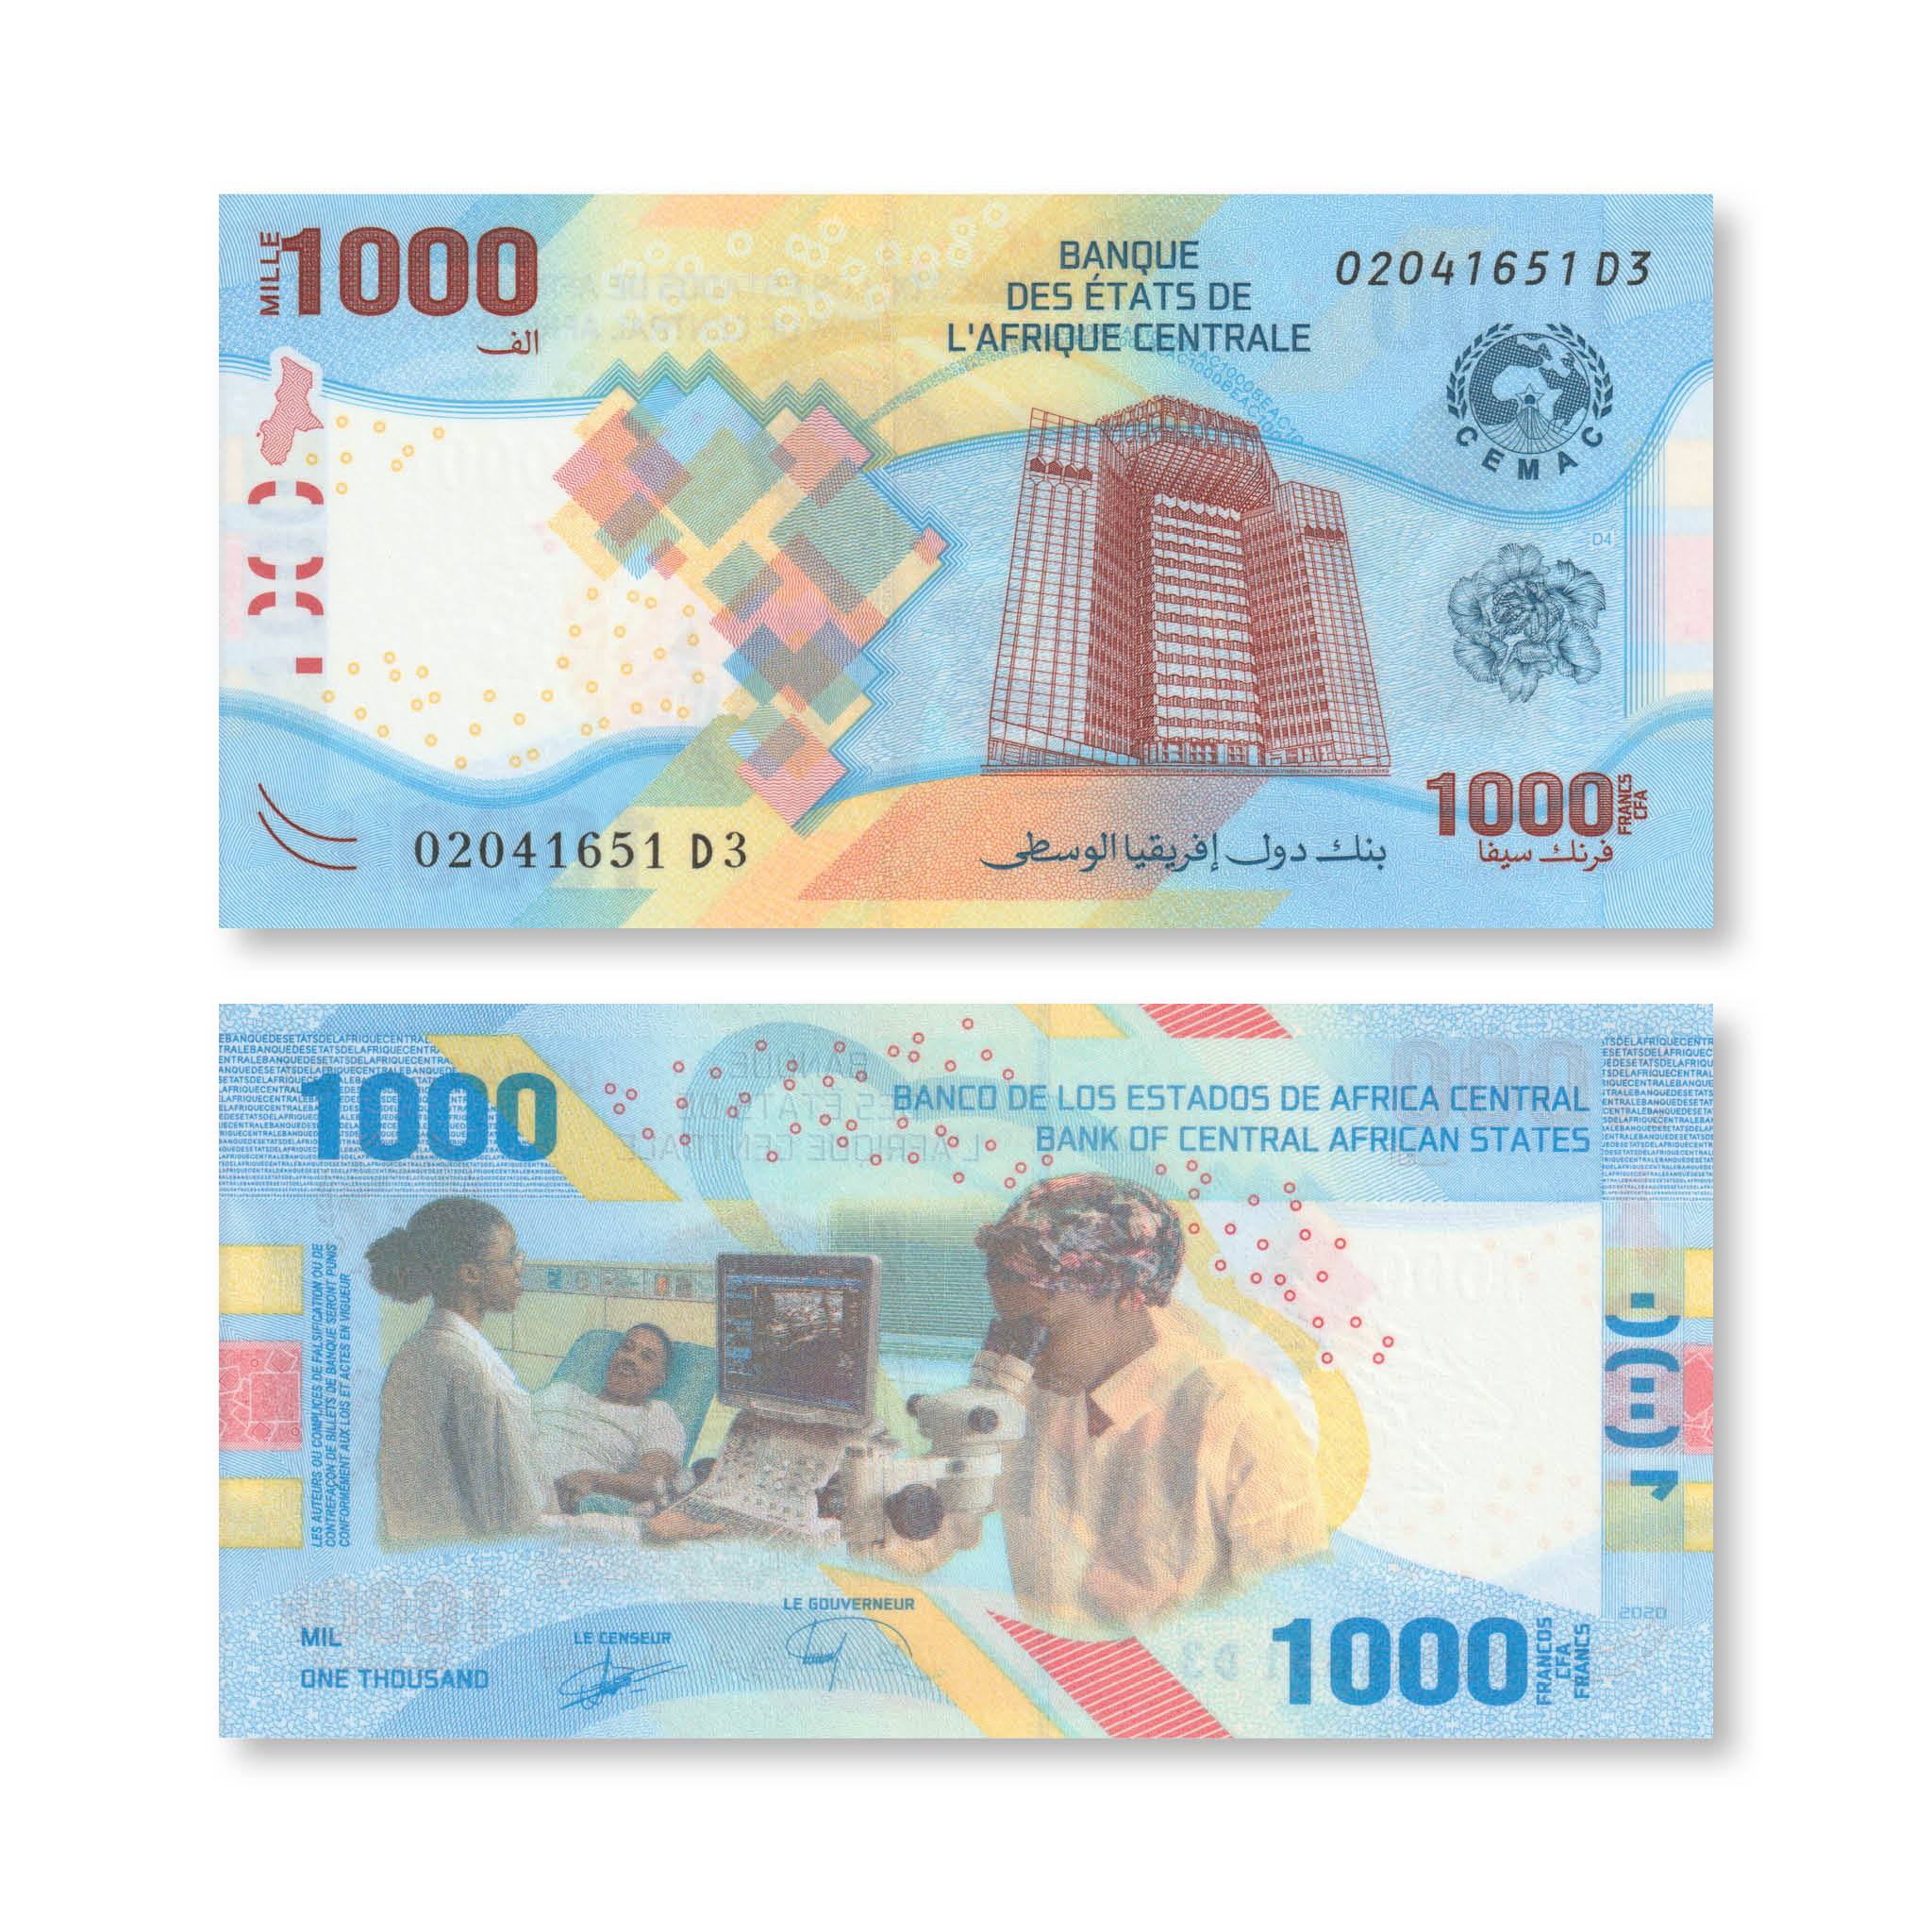 Central African States 1000 Francs, 2020 (2022), B112a, UNC - Robert's World Money - World Banknotes